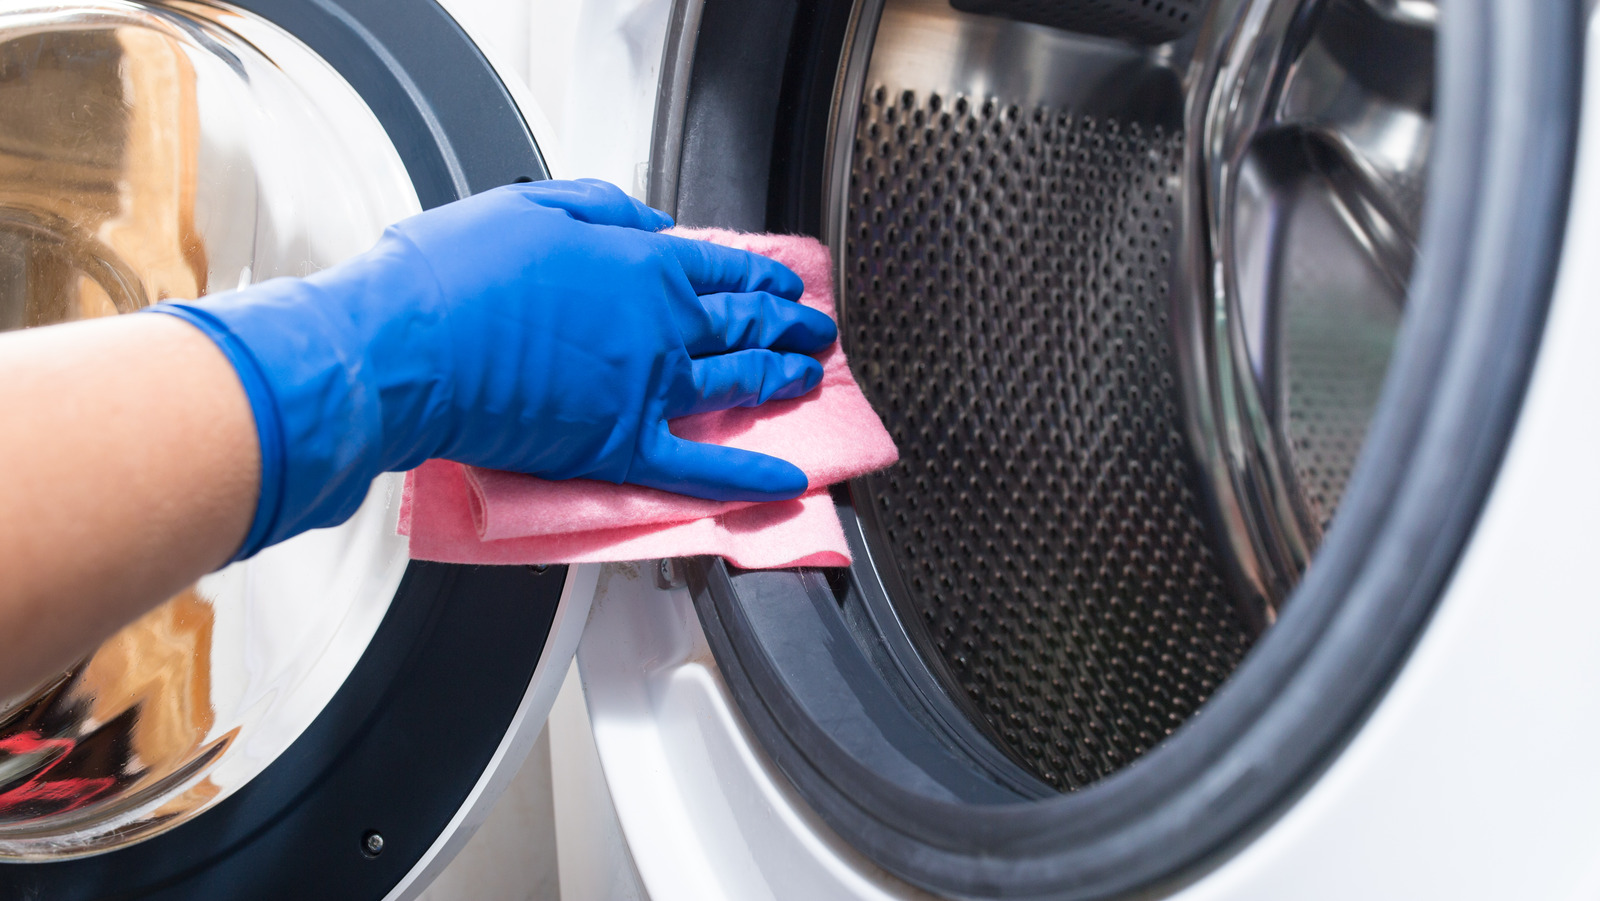 The Top 10 Washing Machine Cleaners To Keep Your Appliance In